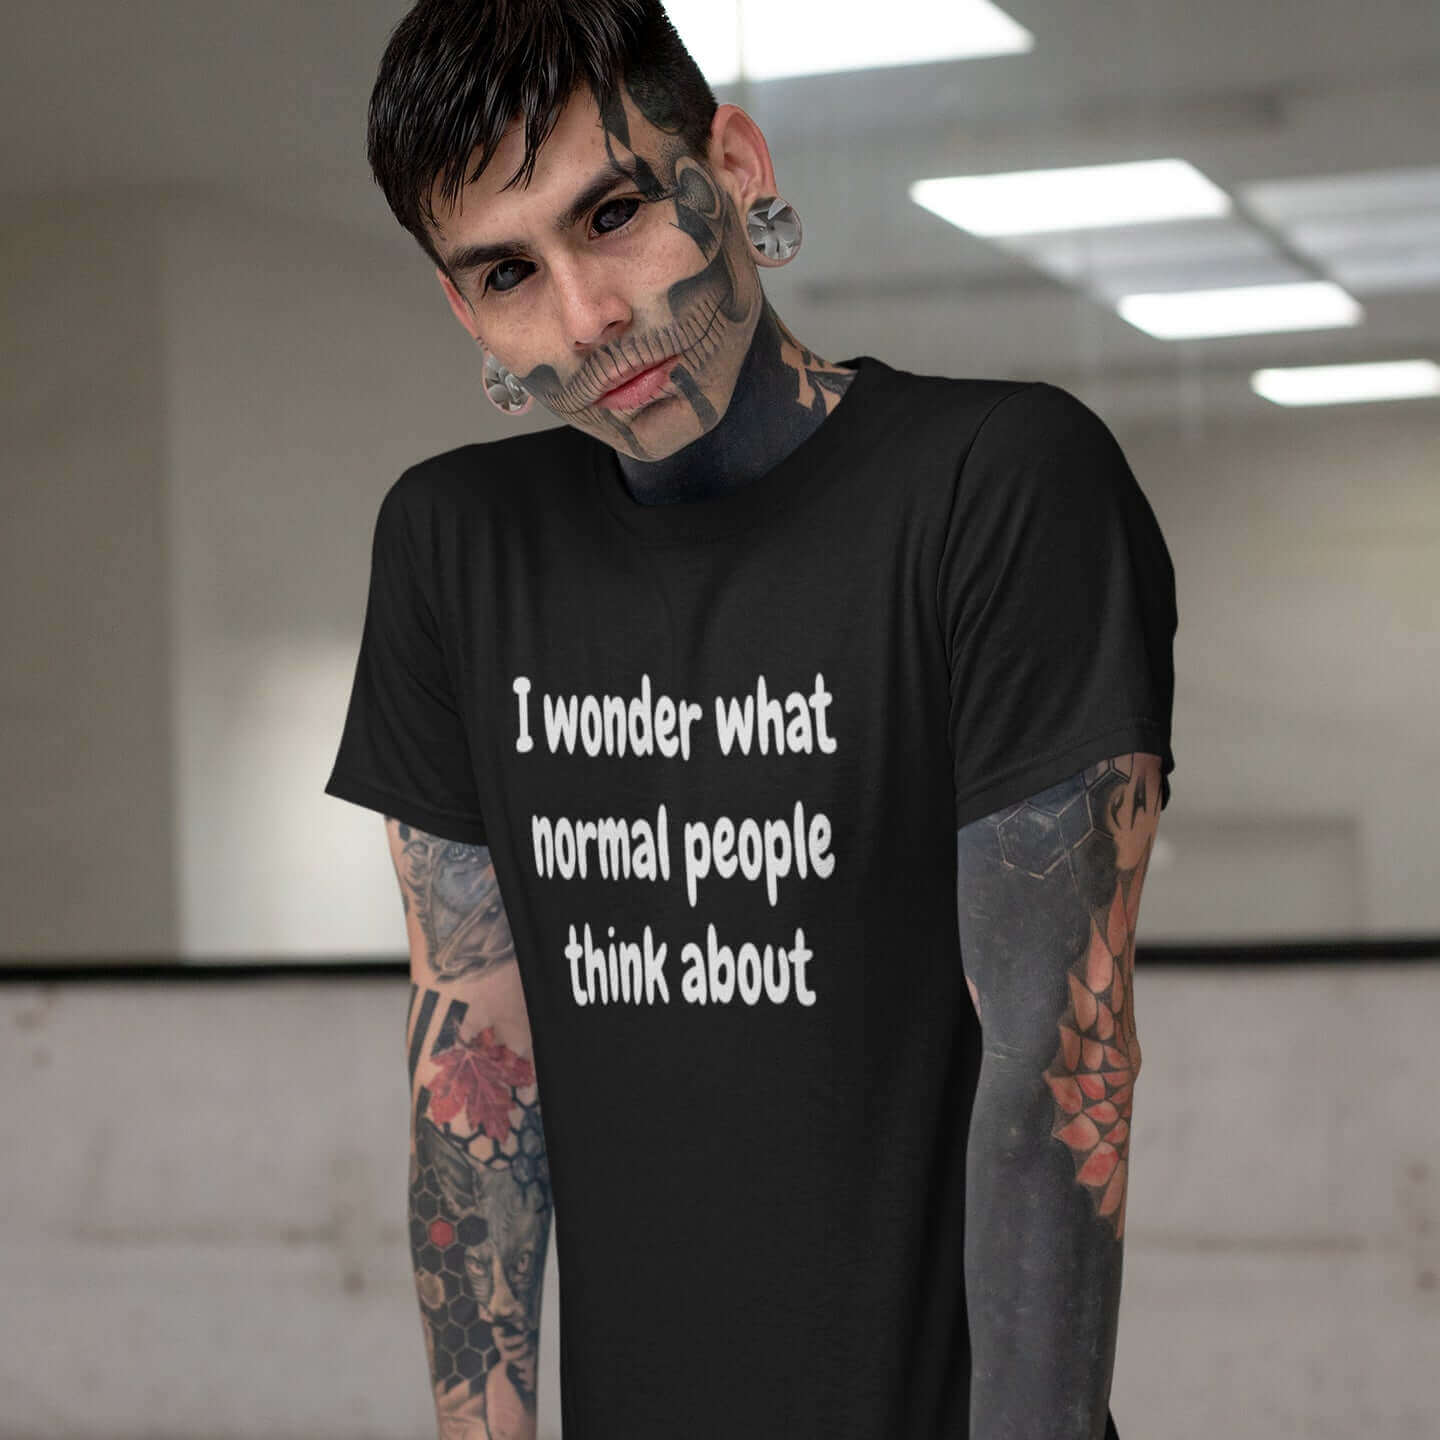 edgy tattooed man with face tattoos wearing black tshirt I wonder what normal people think about witticismsrus